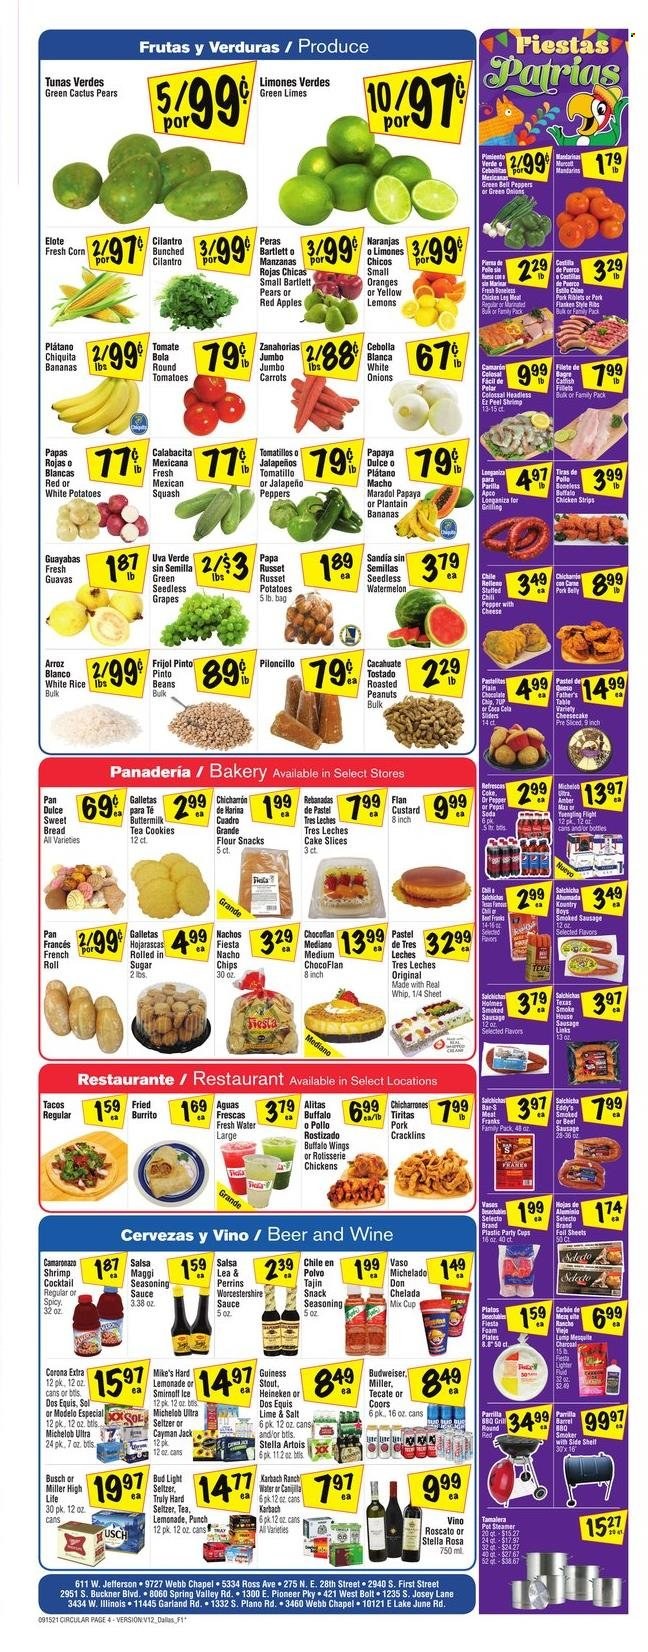 thumbnail - Fiesta Mart Flyer - 09/15/2021 - 09/21/2021 - Sales products - Bartlett pears, seedless grapes, bread, cake, tacos, Father's Table, cheesecake, sweet bread, beans, bell peppers, carrots, corn, russet potatoes, tomatillo, tomatoes, potatoes, peppers, green onion, apples, bananas, grapes, limes, mandarines, watermelon, papaya, pears, oranges, shrimps, sauce, burrito, sausage, smoked sausage, cheese, custard, buttermilk, strips, chicken strips, snack, chips, Maggi, pinto beans, rice, white rice, cilantro, spice, worcestershire sauce, salsa, Coca-Cola, lemonade, Pepsi, tea, punch, Hard Seltzer, TRULY, beer, Busch, Bud Light, Corona Extra, Heineken, Miller, Modelo, chicken legs, pork belly, pork meat, foam plates, party cups, Budweiser, Stella Artois, Coors, Dos Equis, Michelob, lemons. Page 4.